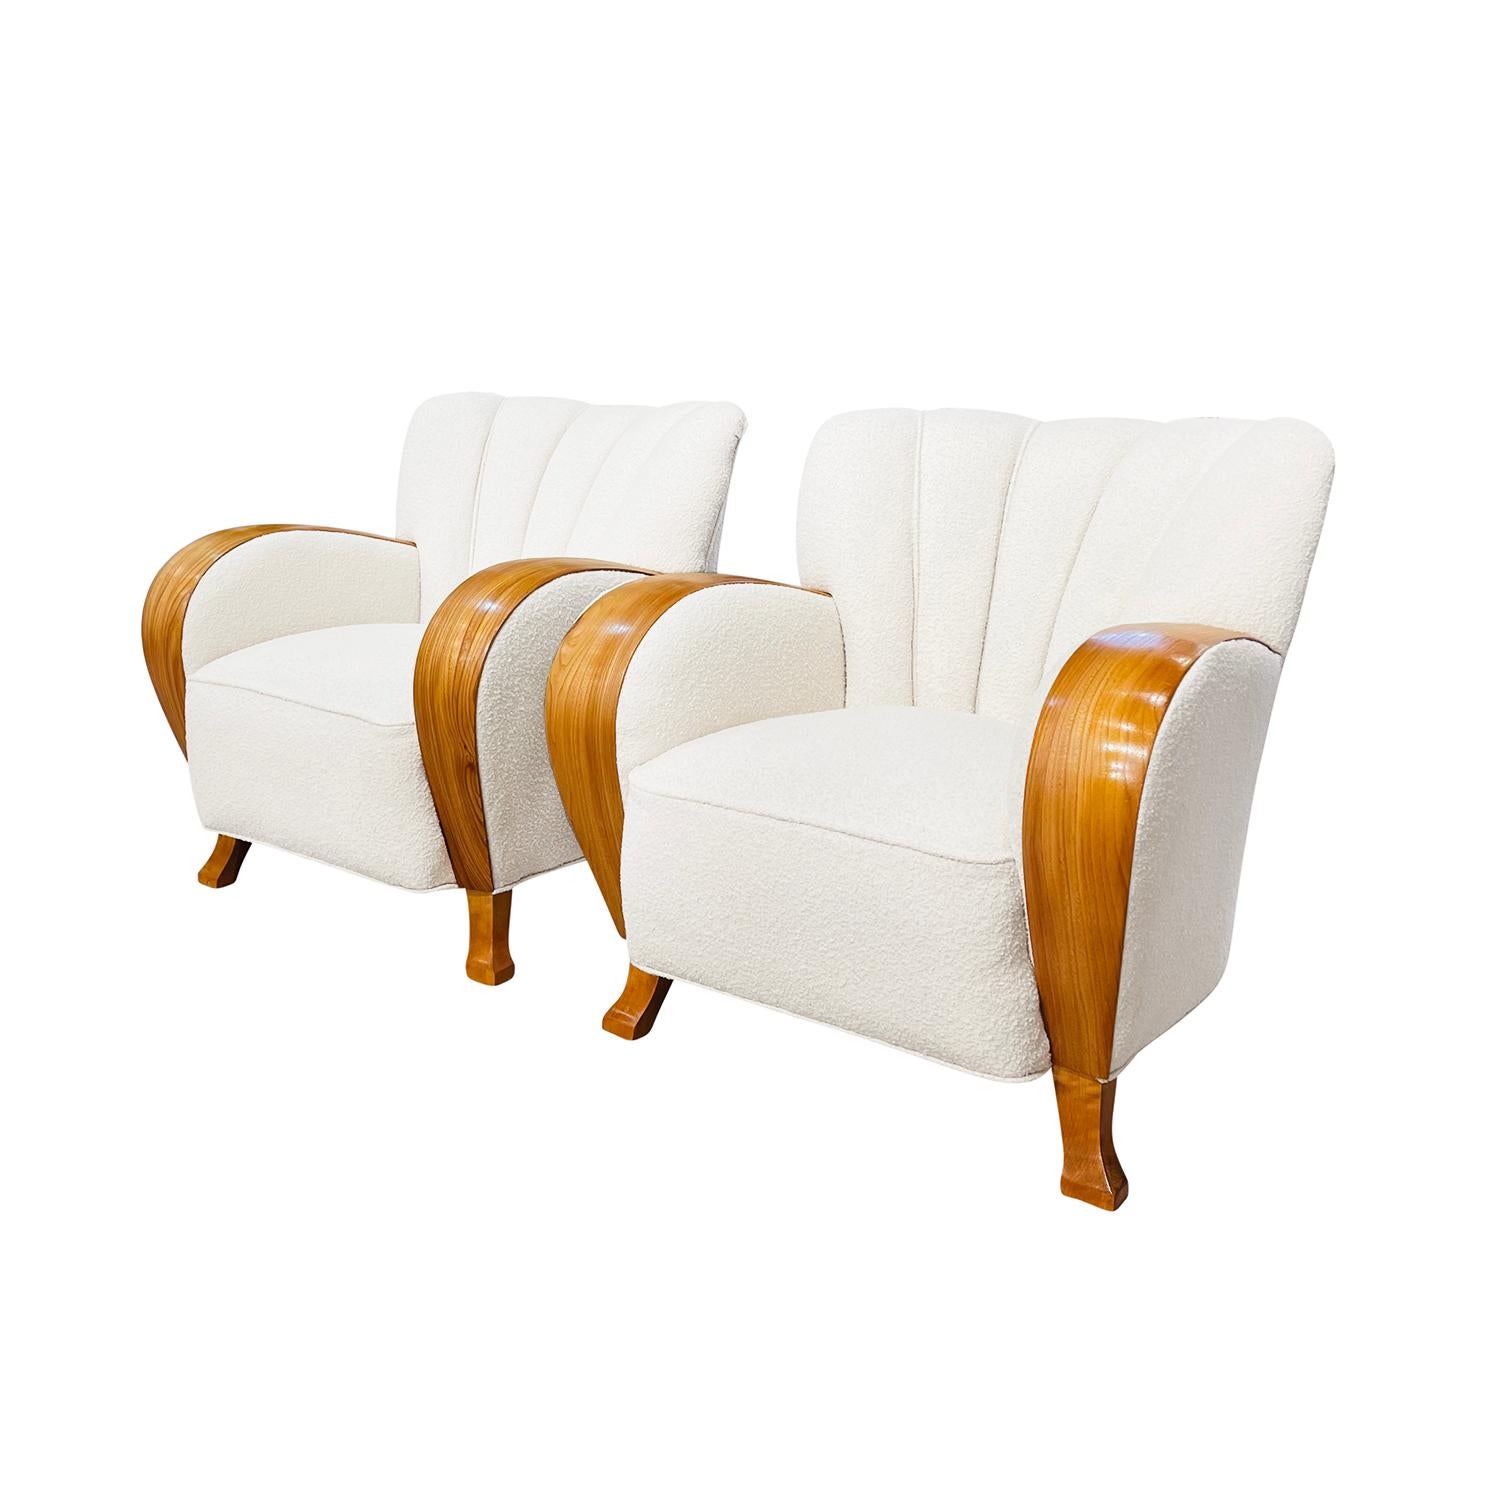 Hand-Carved 20th Century Pair of Vintage Large Danish Birch Scandinavian Lounge Chairs For Sale